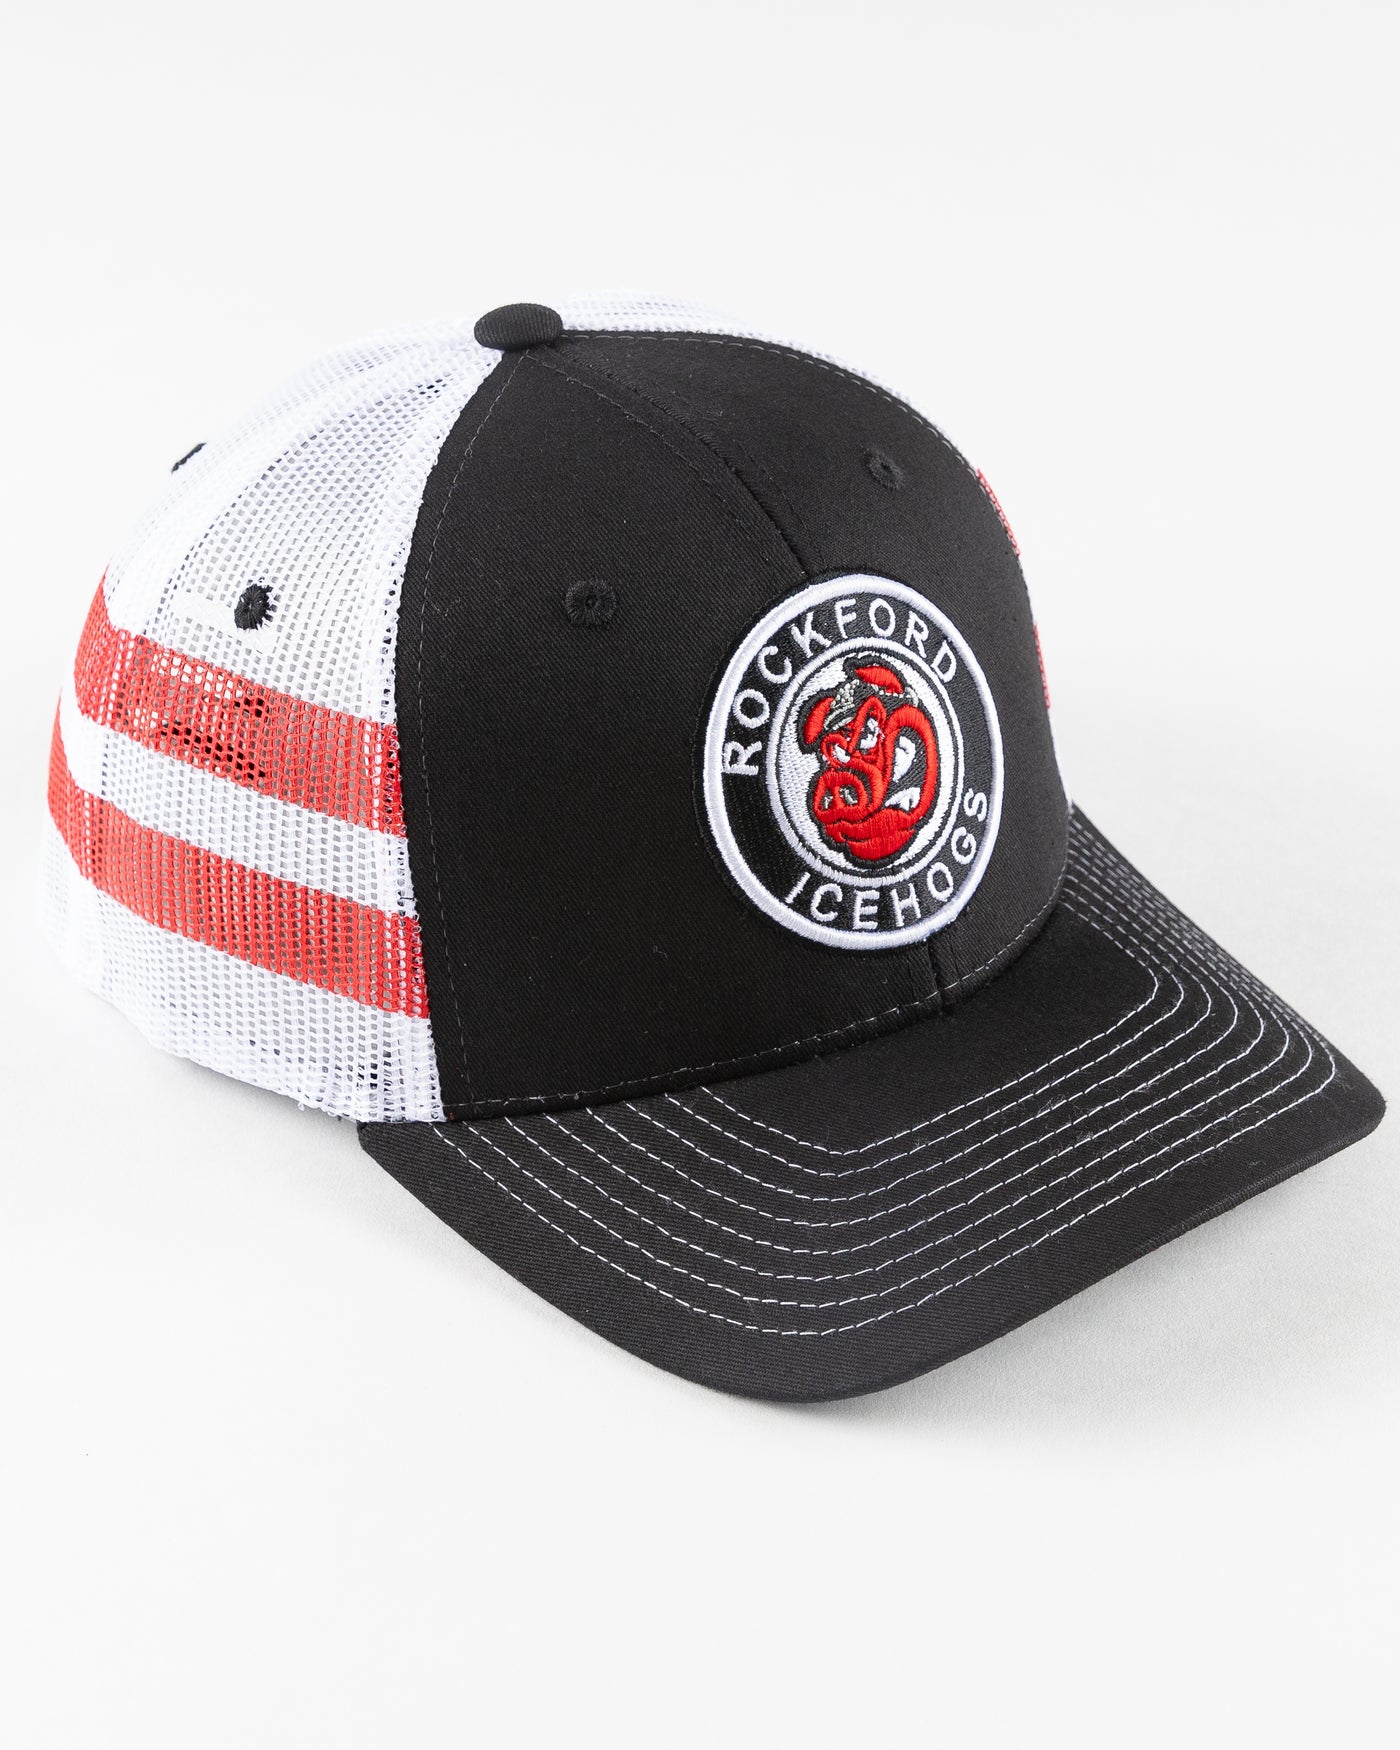 Rockford IceHogs black and white trucker with embroidered patch on front - right angle lay flat